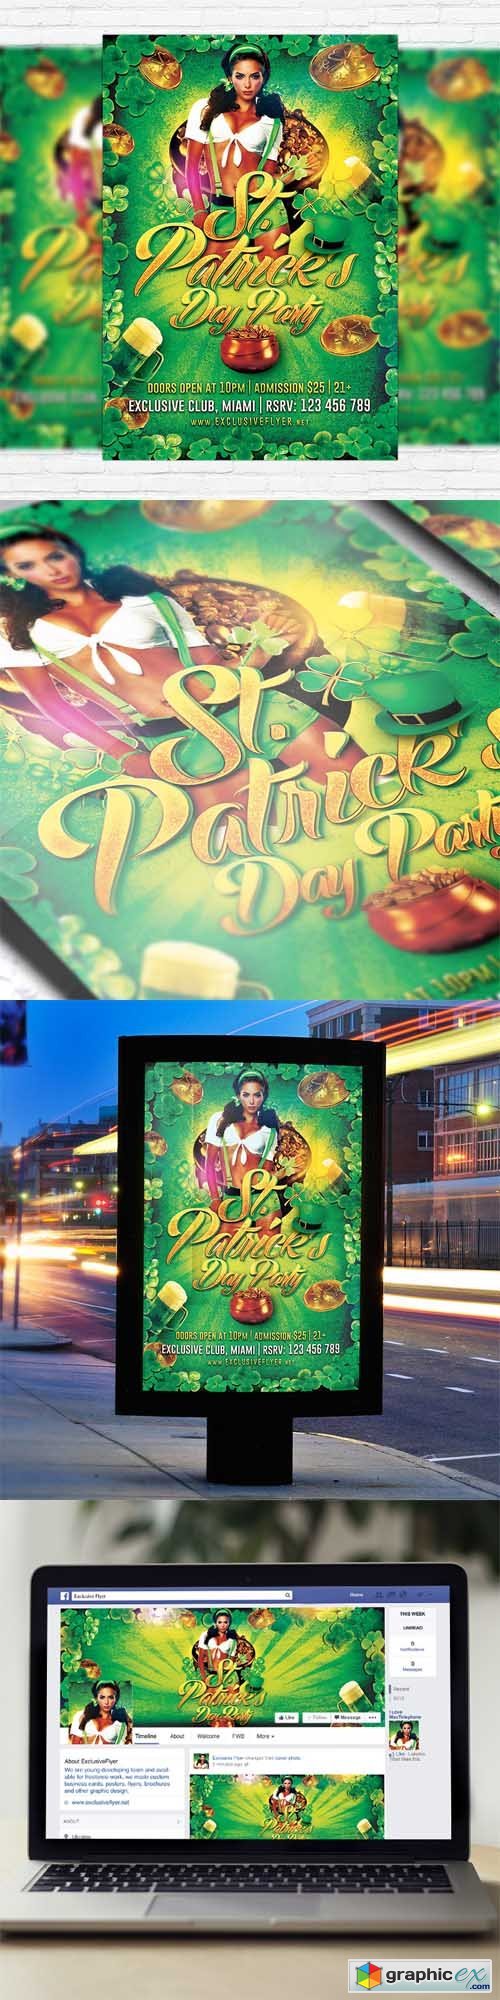 St. Patricks Day Party - Flyer Template + Facebook Cover